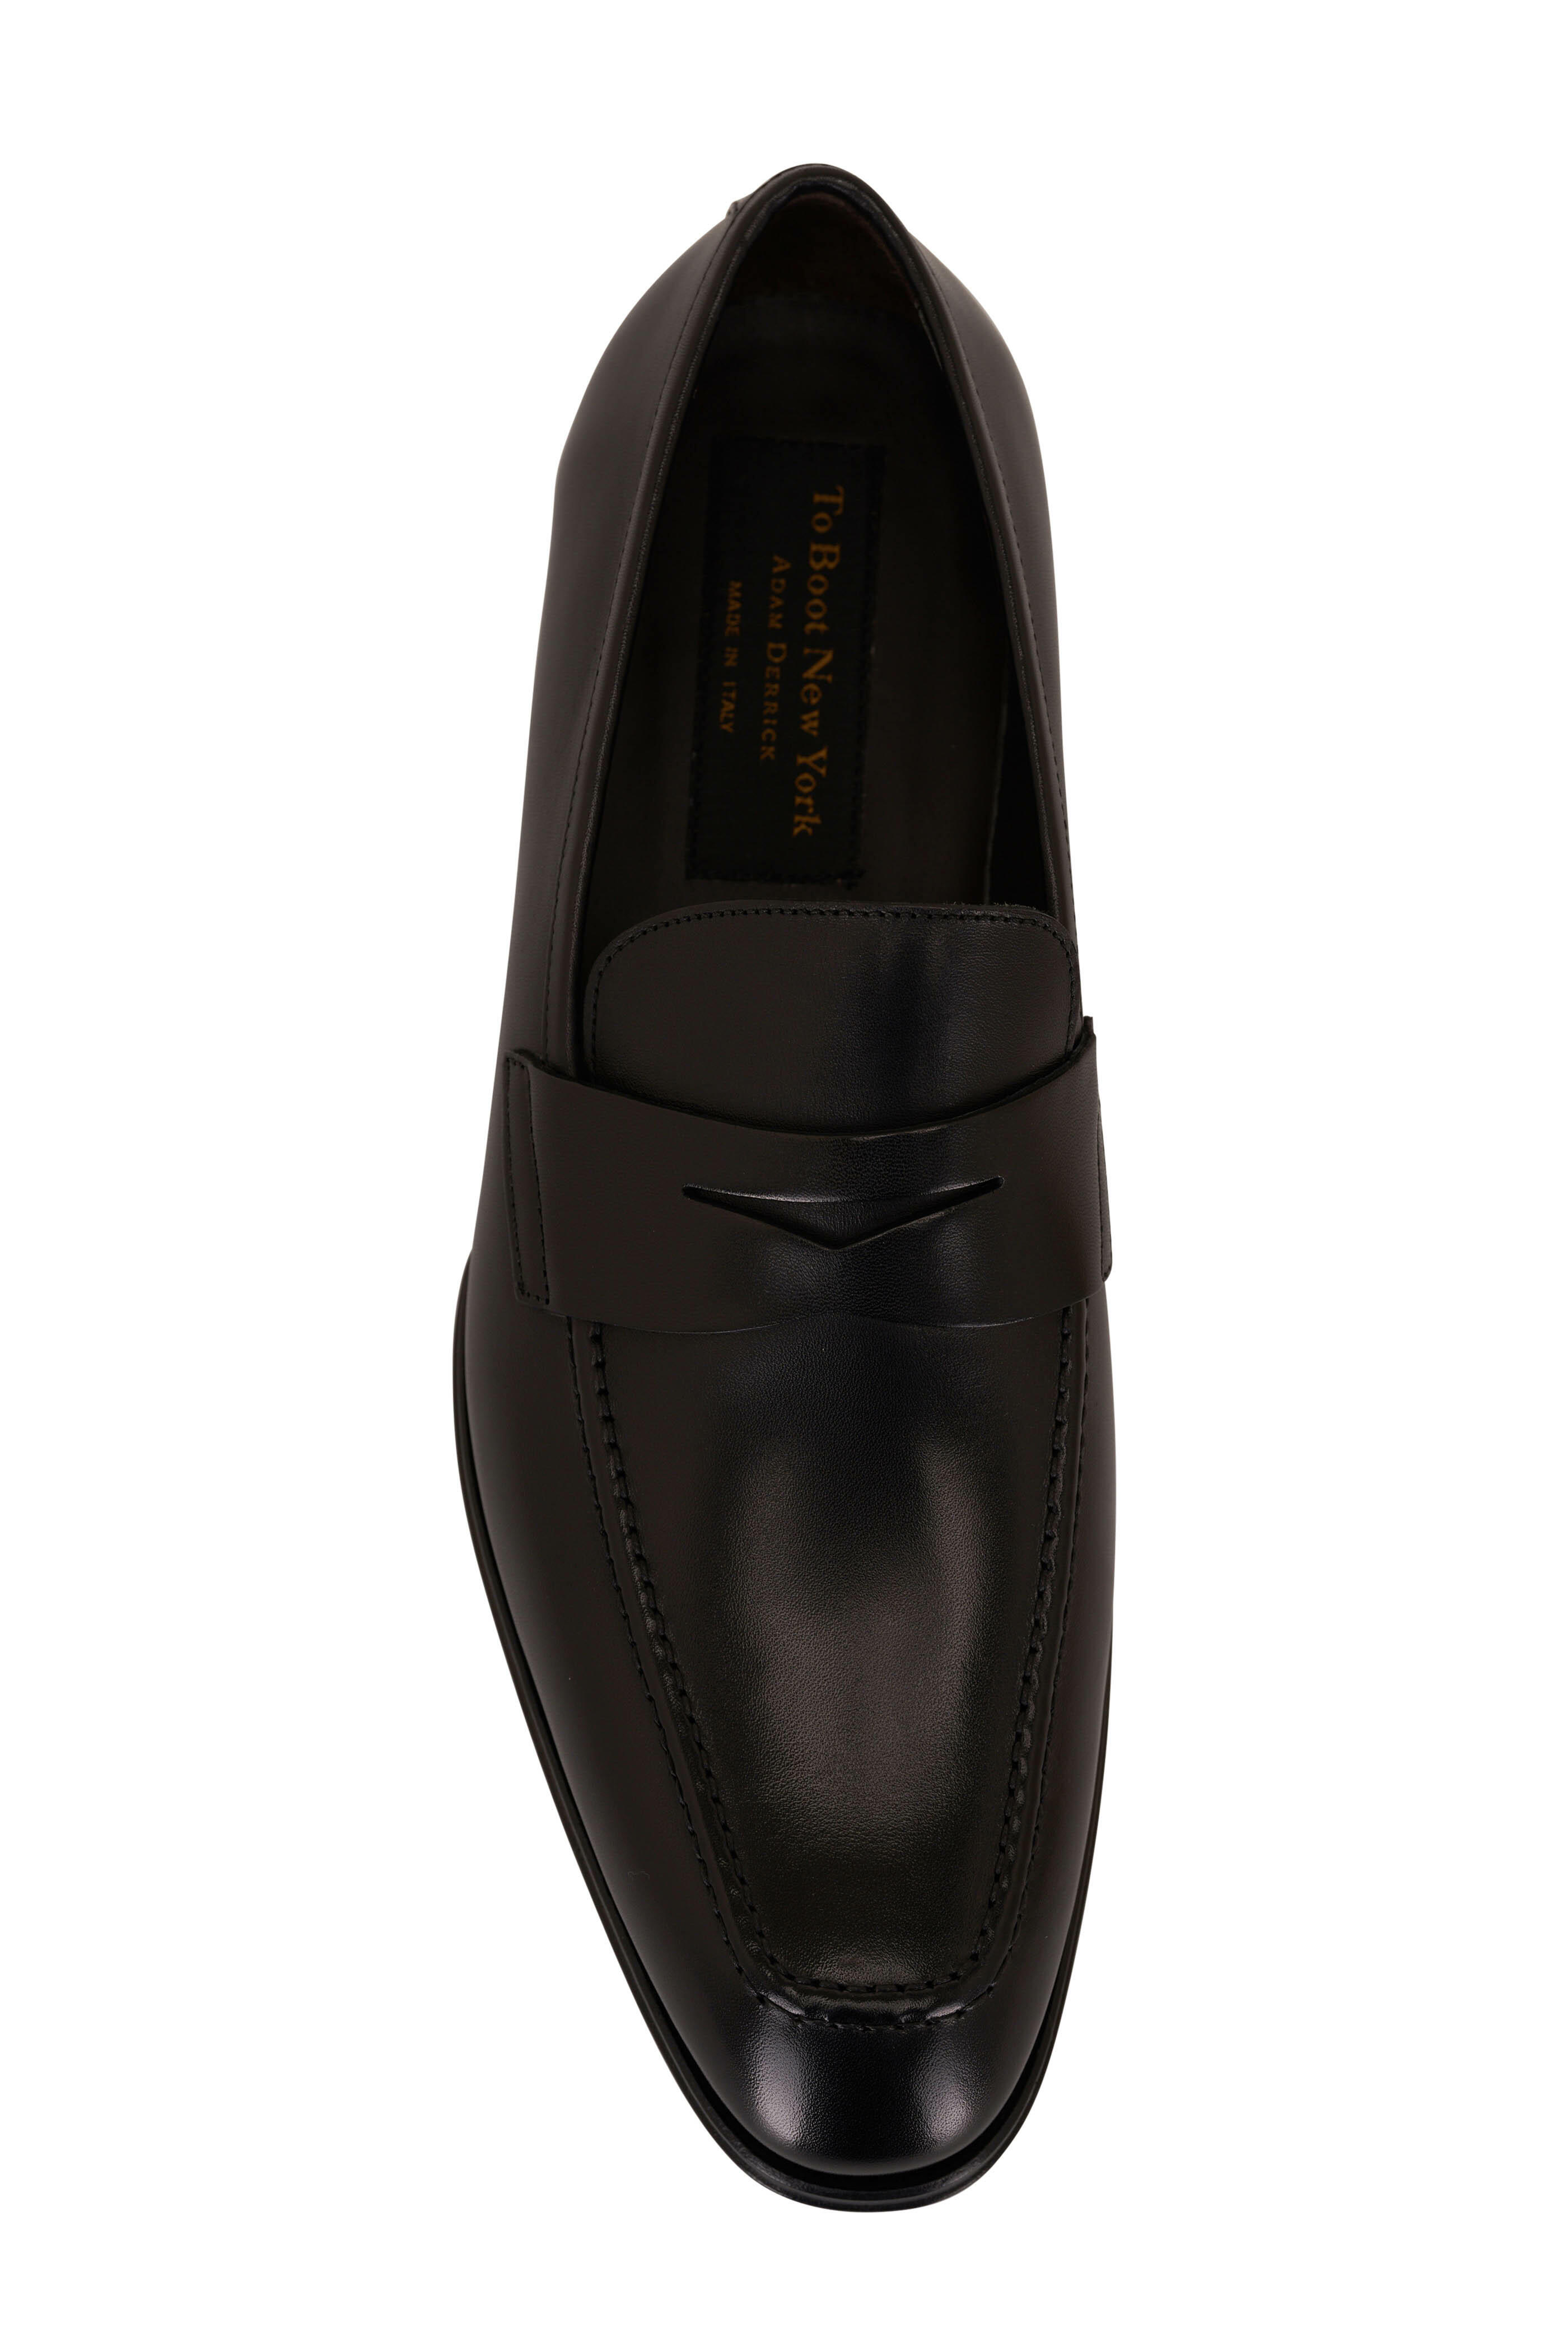 To Boot New York - Marcus Black Leather Penny Loafer